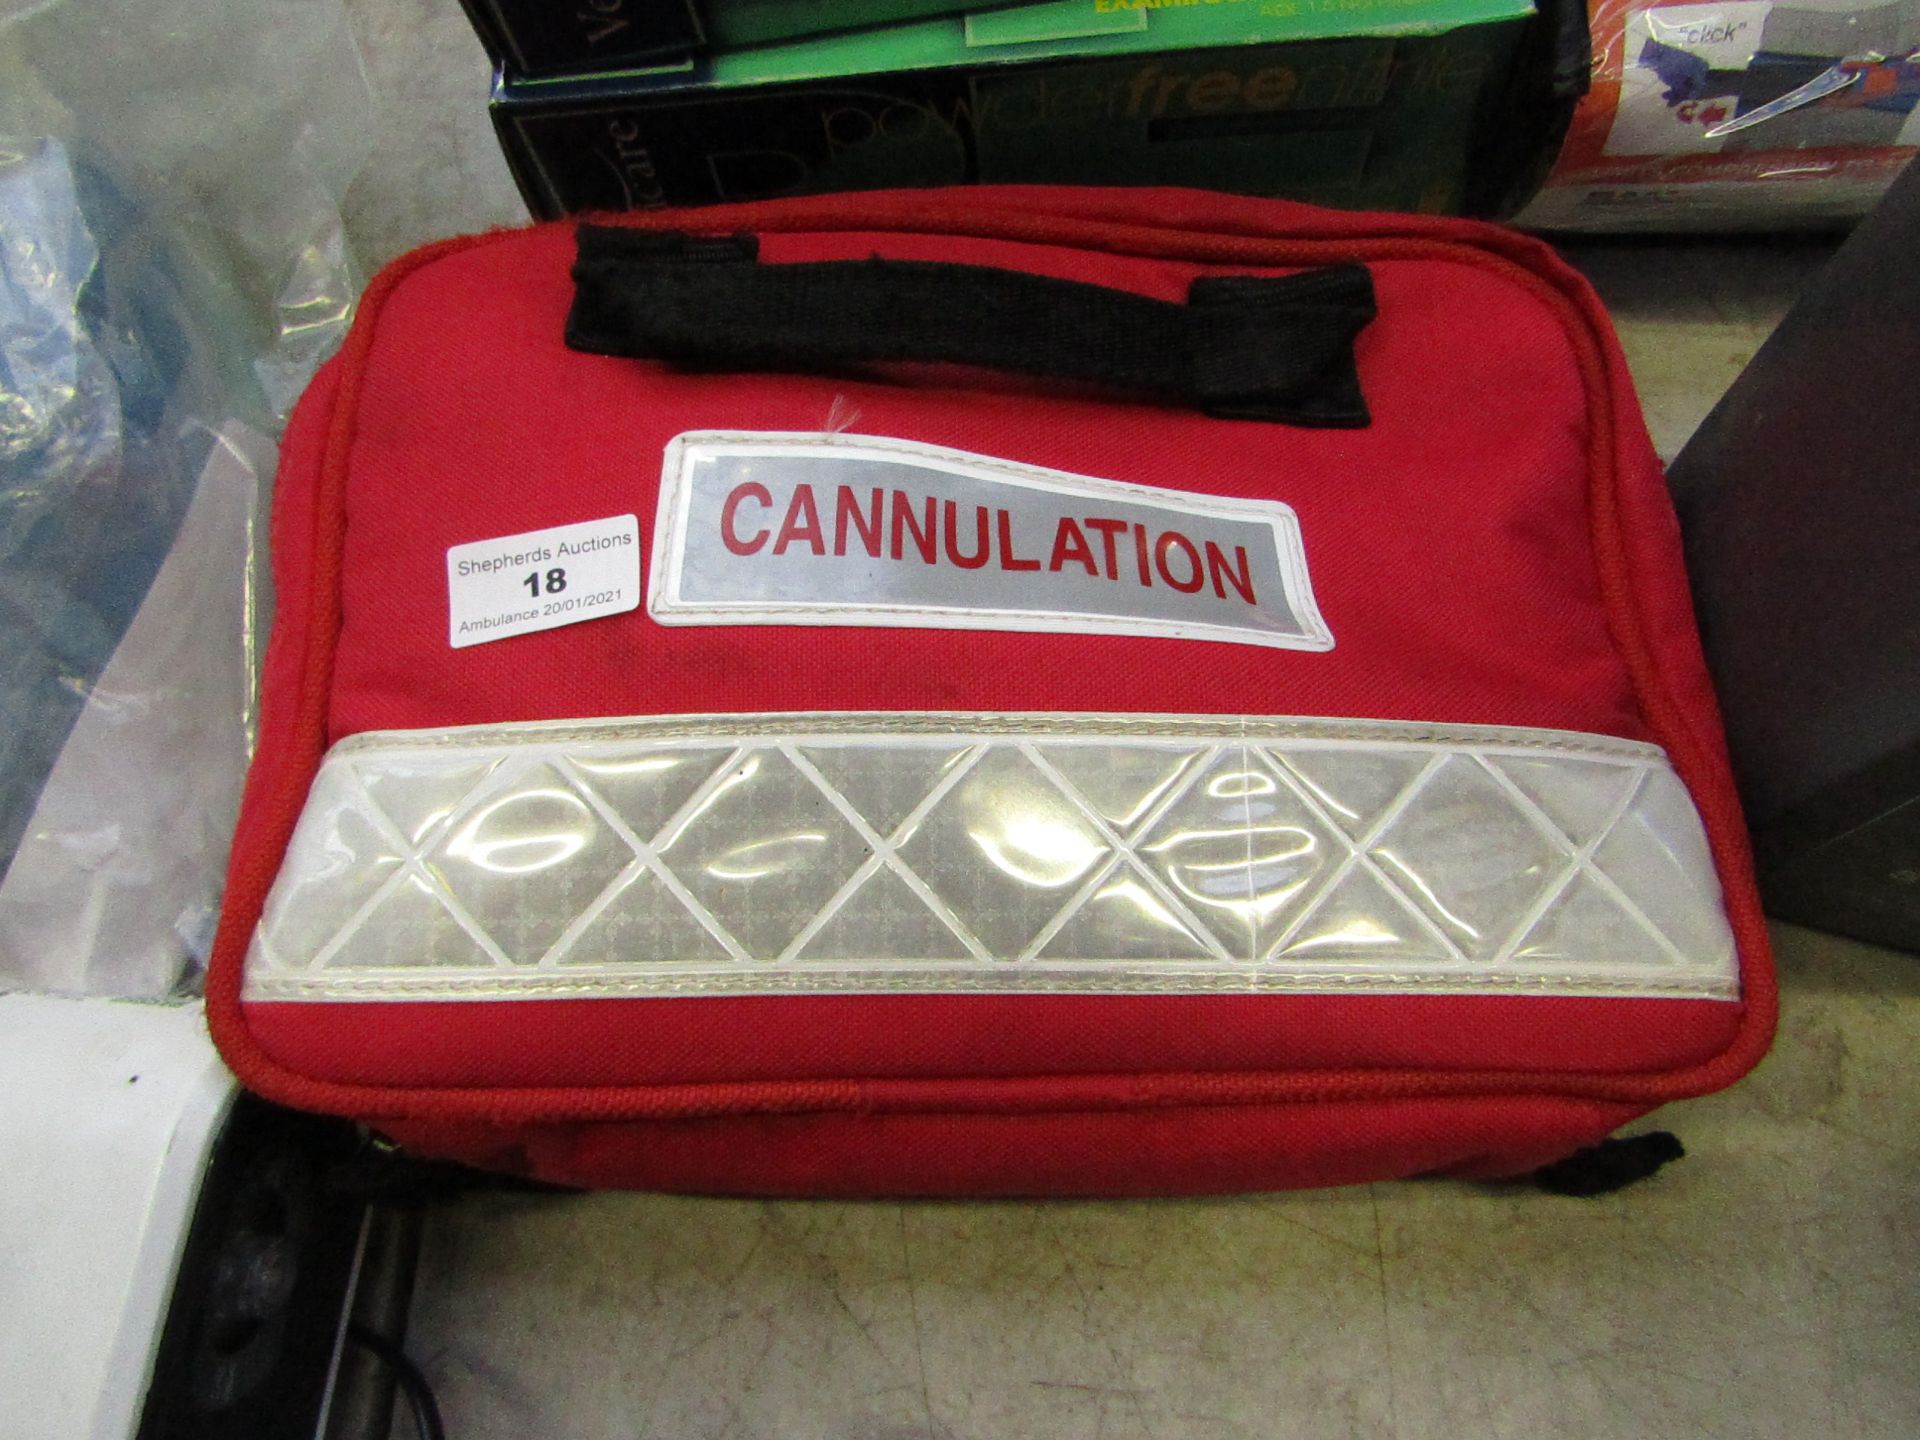 Cannulation Kit - Contains Various Items.